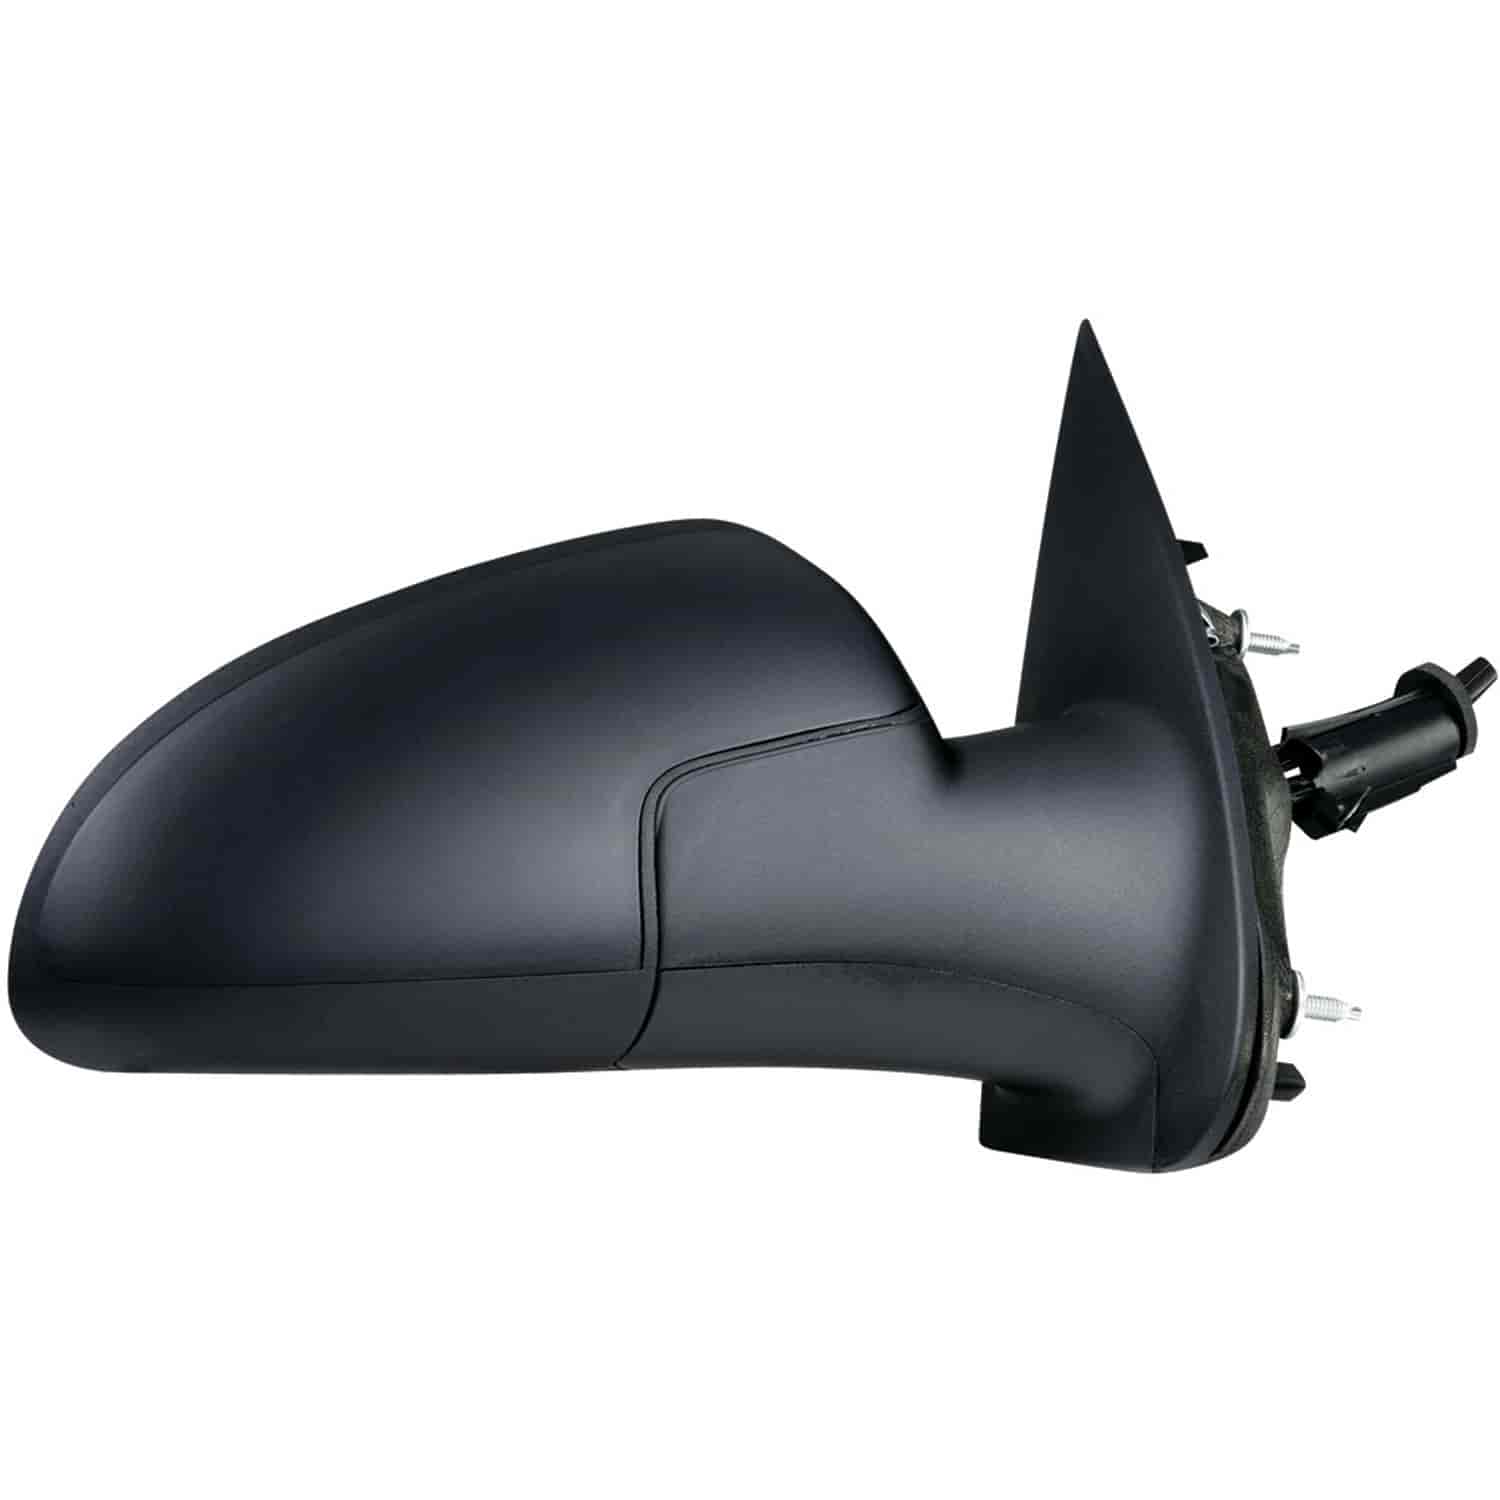 OEM Style Replacement mirror for 05-10 Chevrolet Cobalt Sedan passenger side mirror tested to fit an